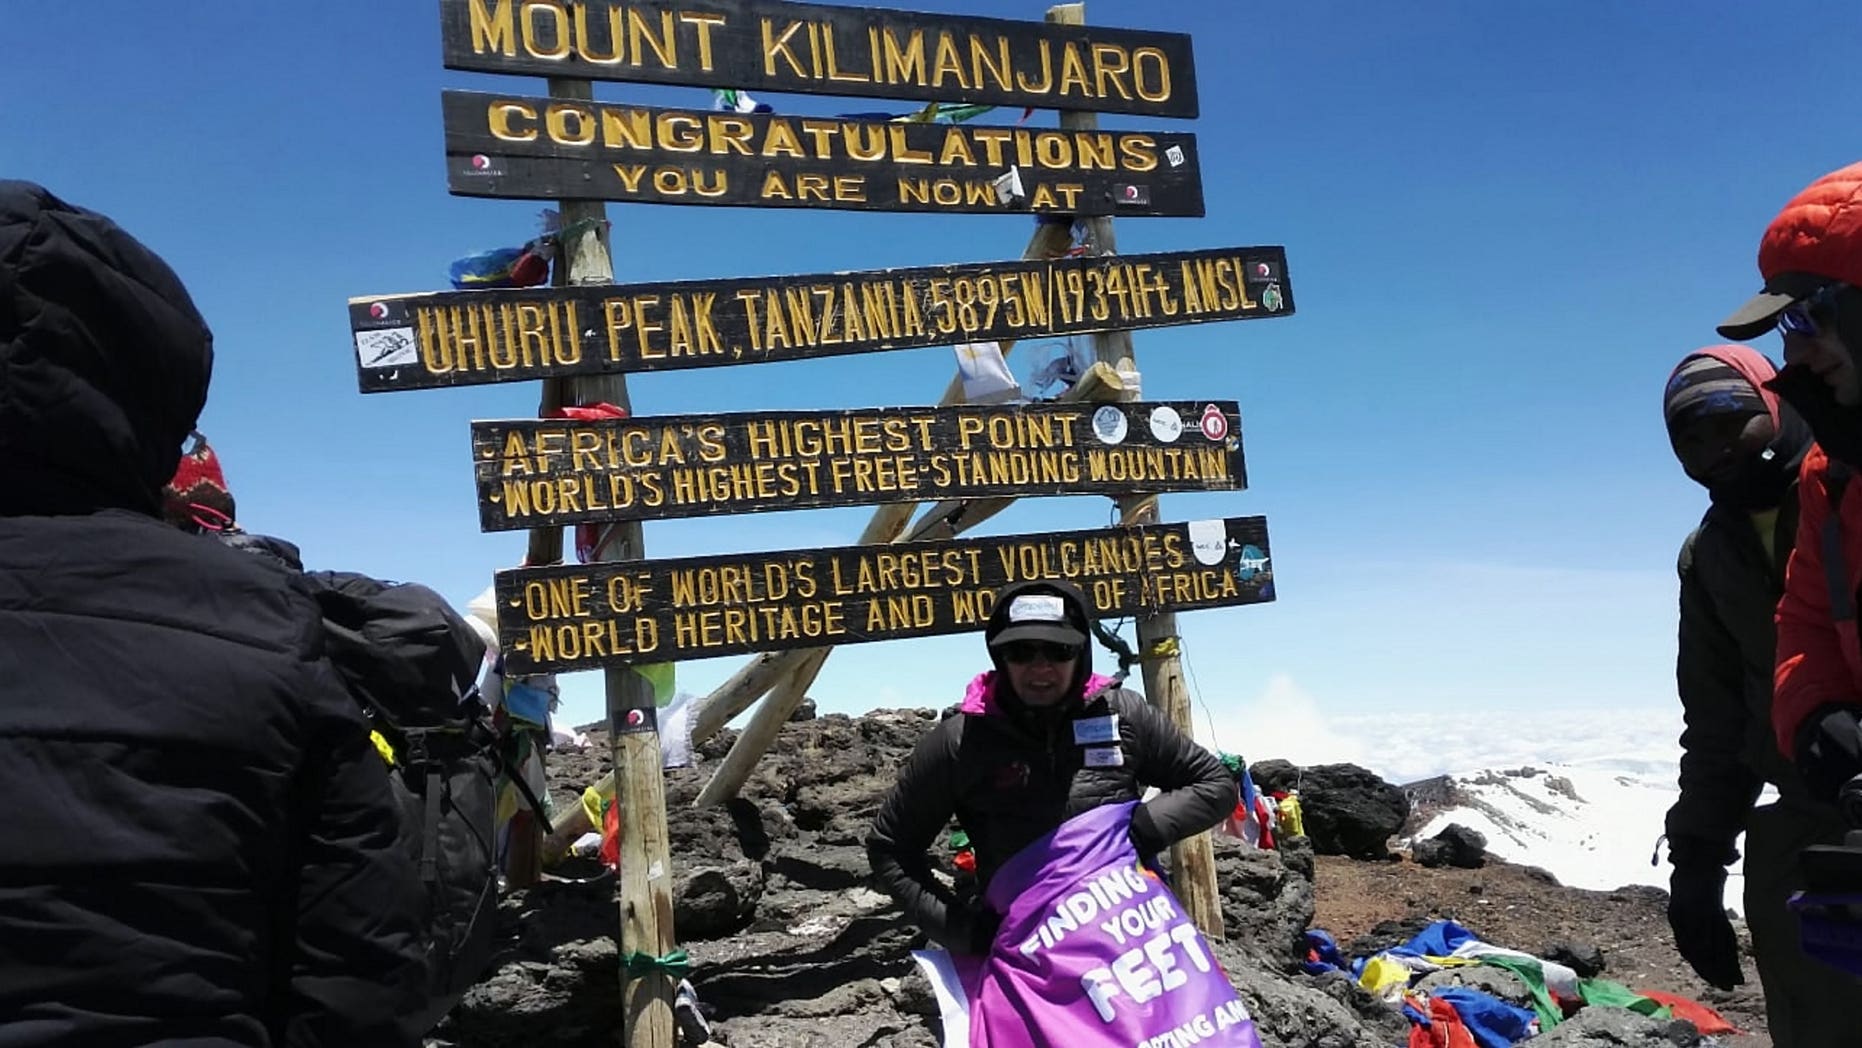 Connie Hutton, 48 climbed the mountain. Kilimanjaro after being amputated from the hands and feet as a result of sepsis. 